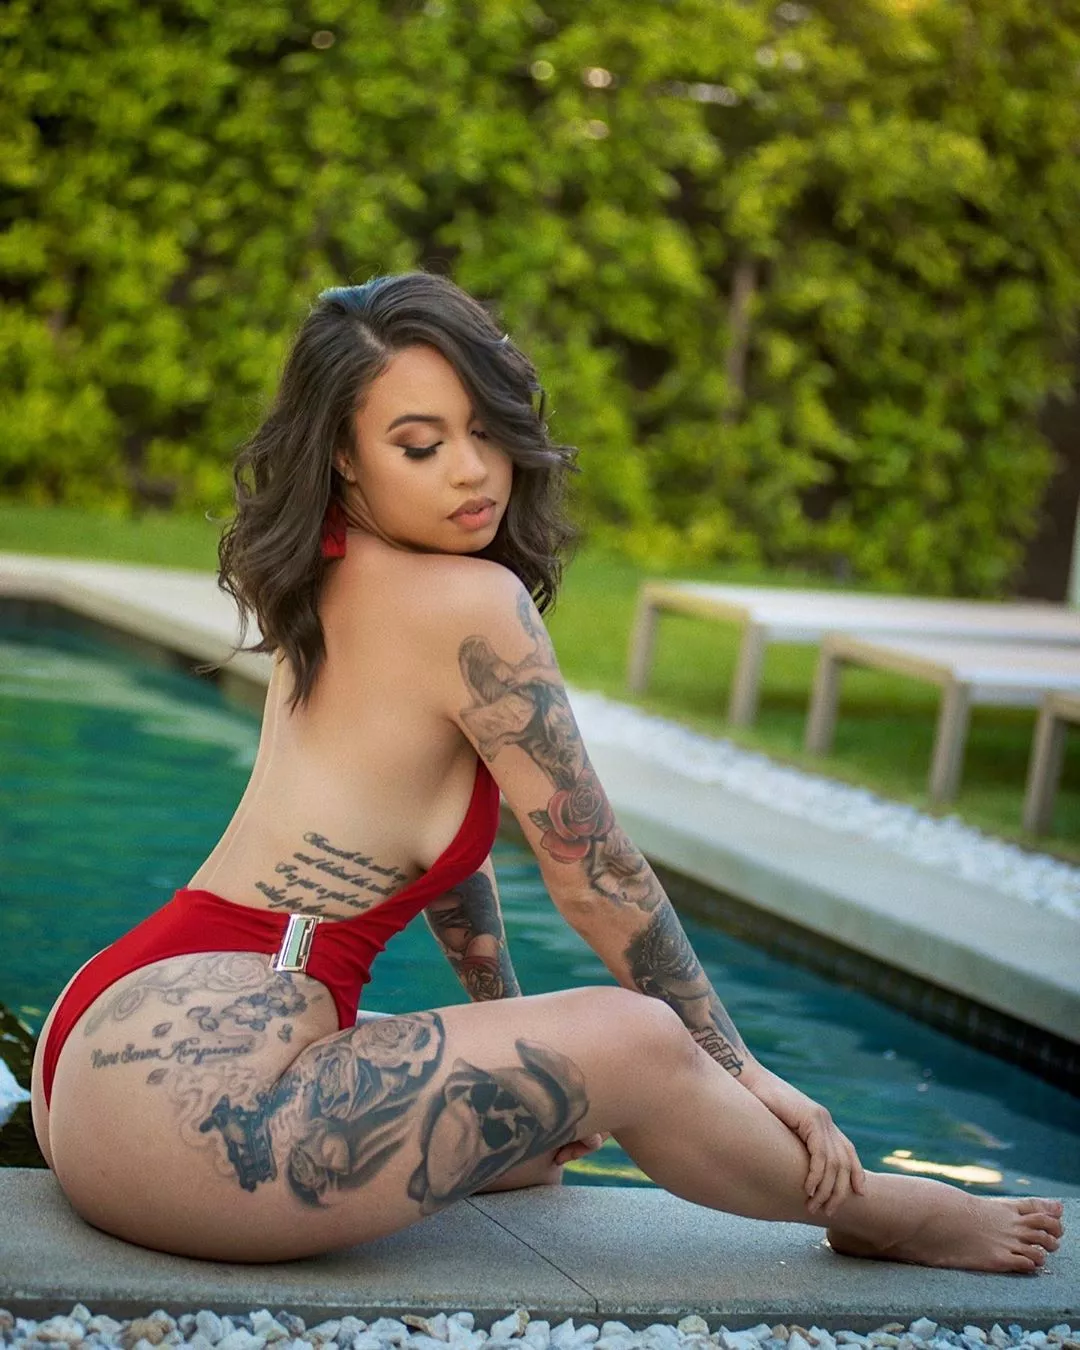 Watch kat from black ink crew nudes in HipHopGoneWild www.asspictures...